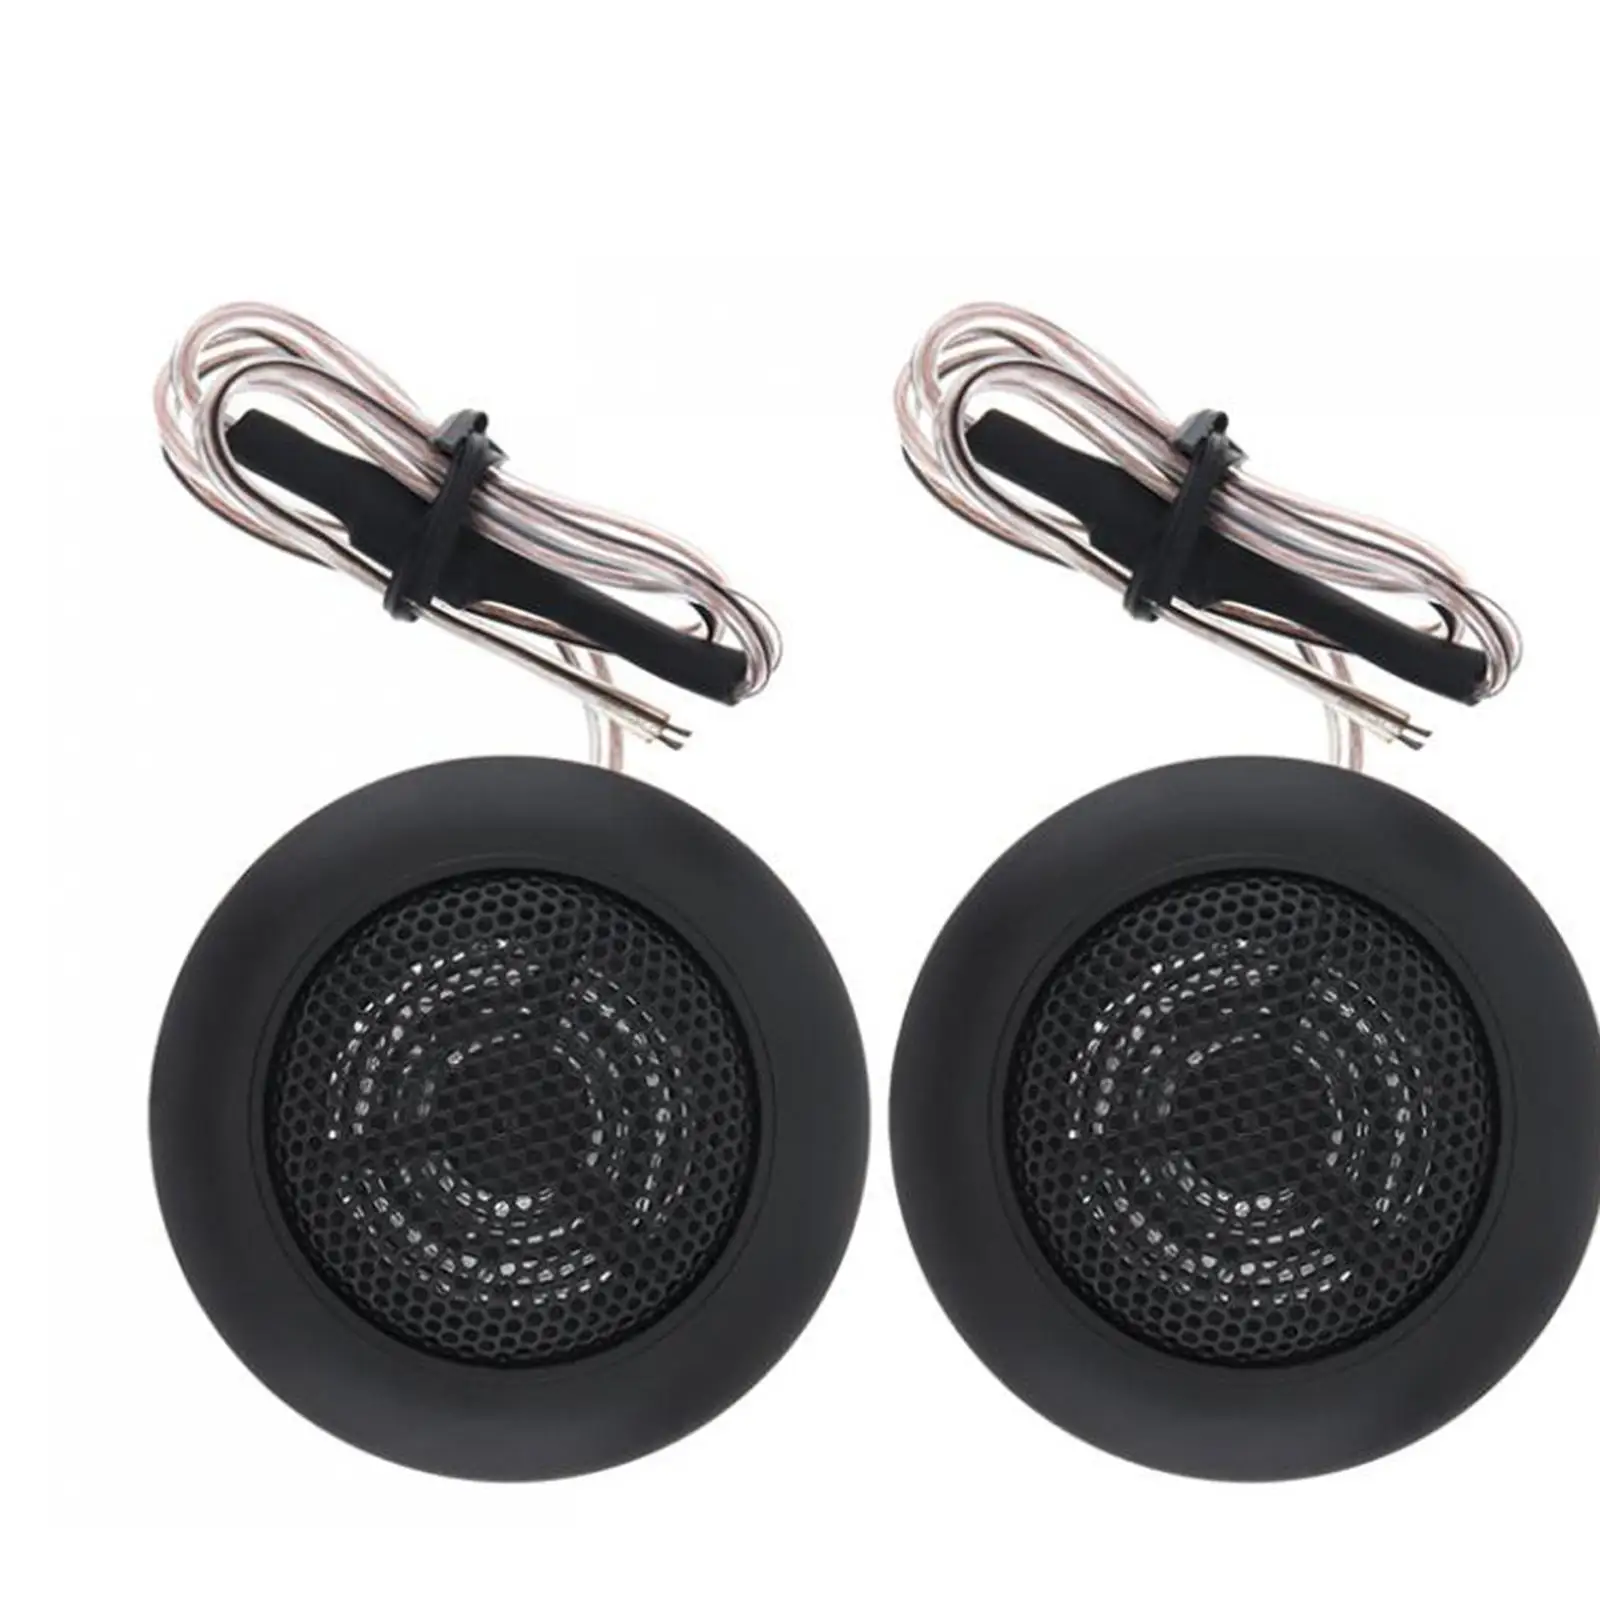 Car Audio Speaker High Performance for Car Audio System Durable Accessory